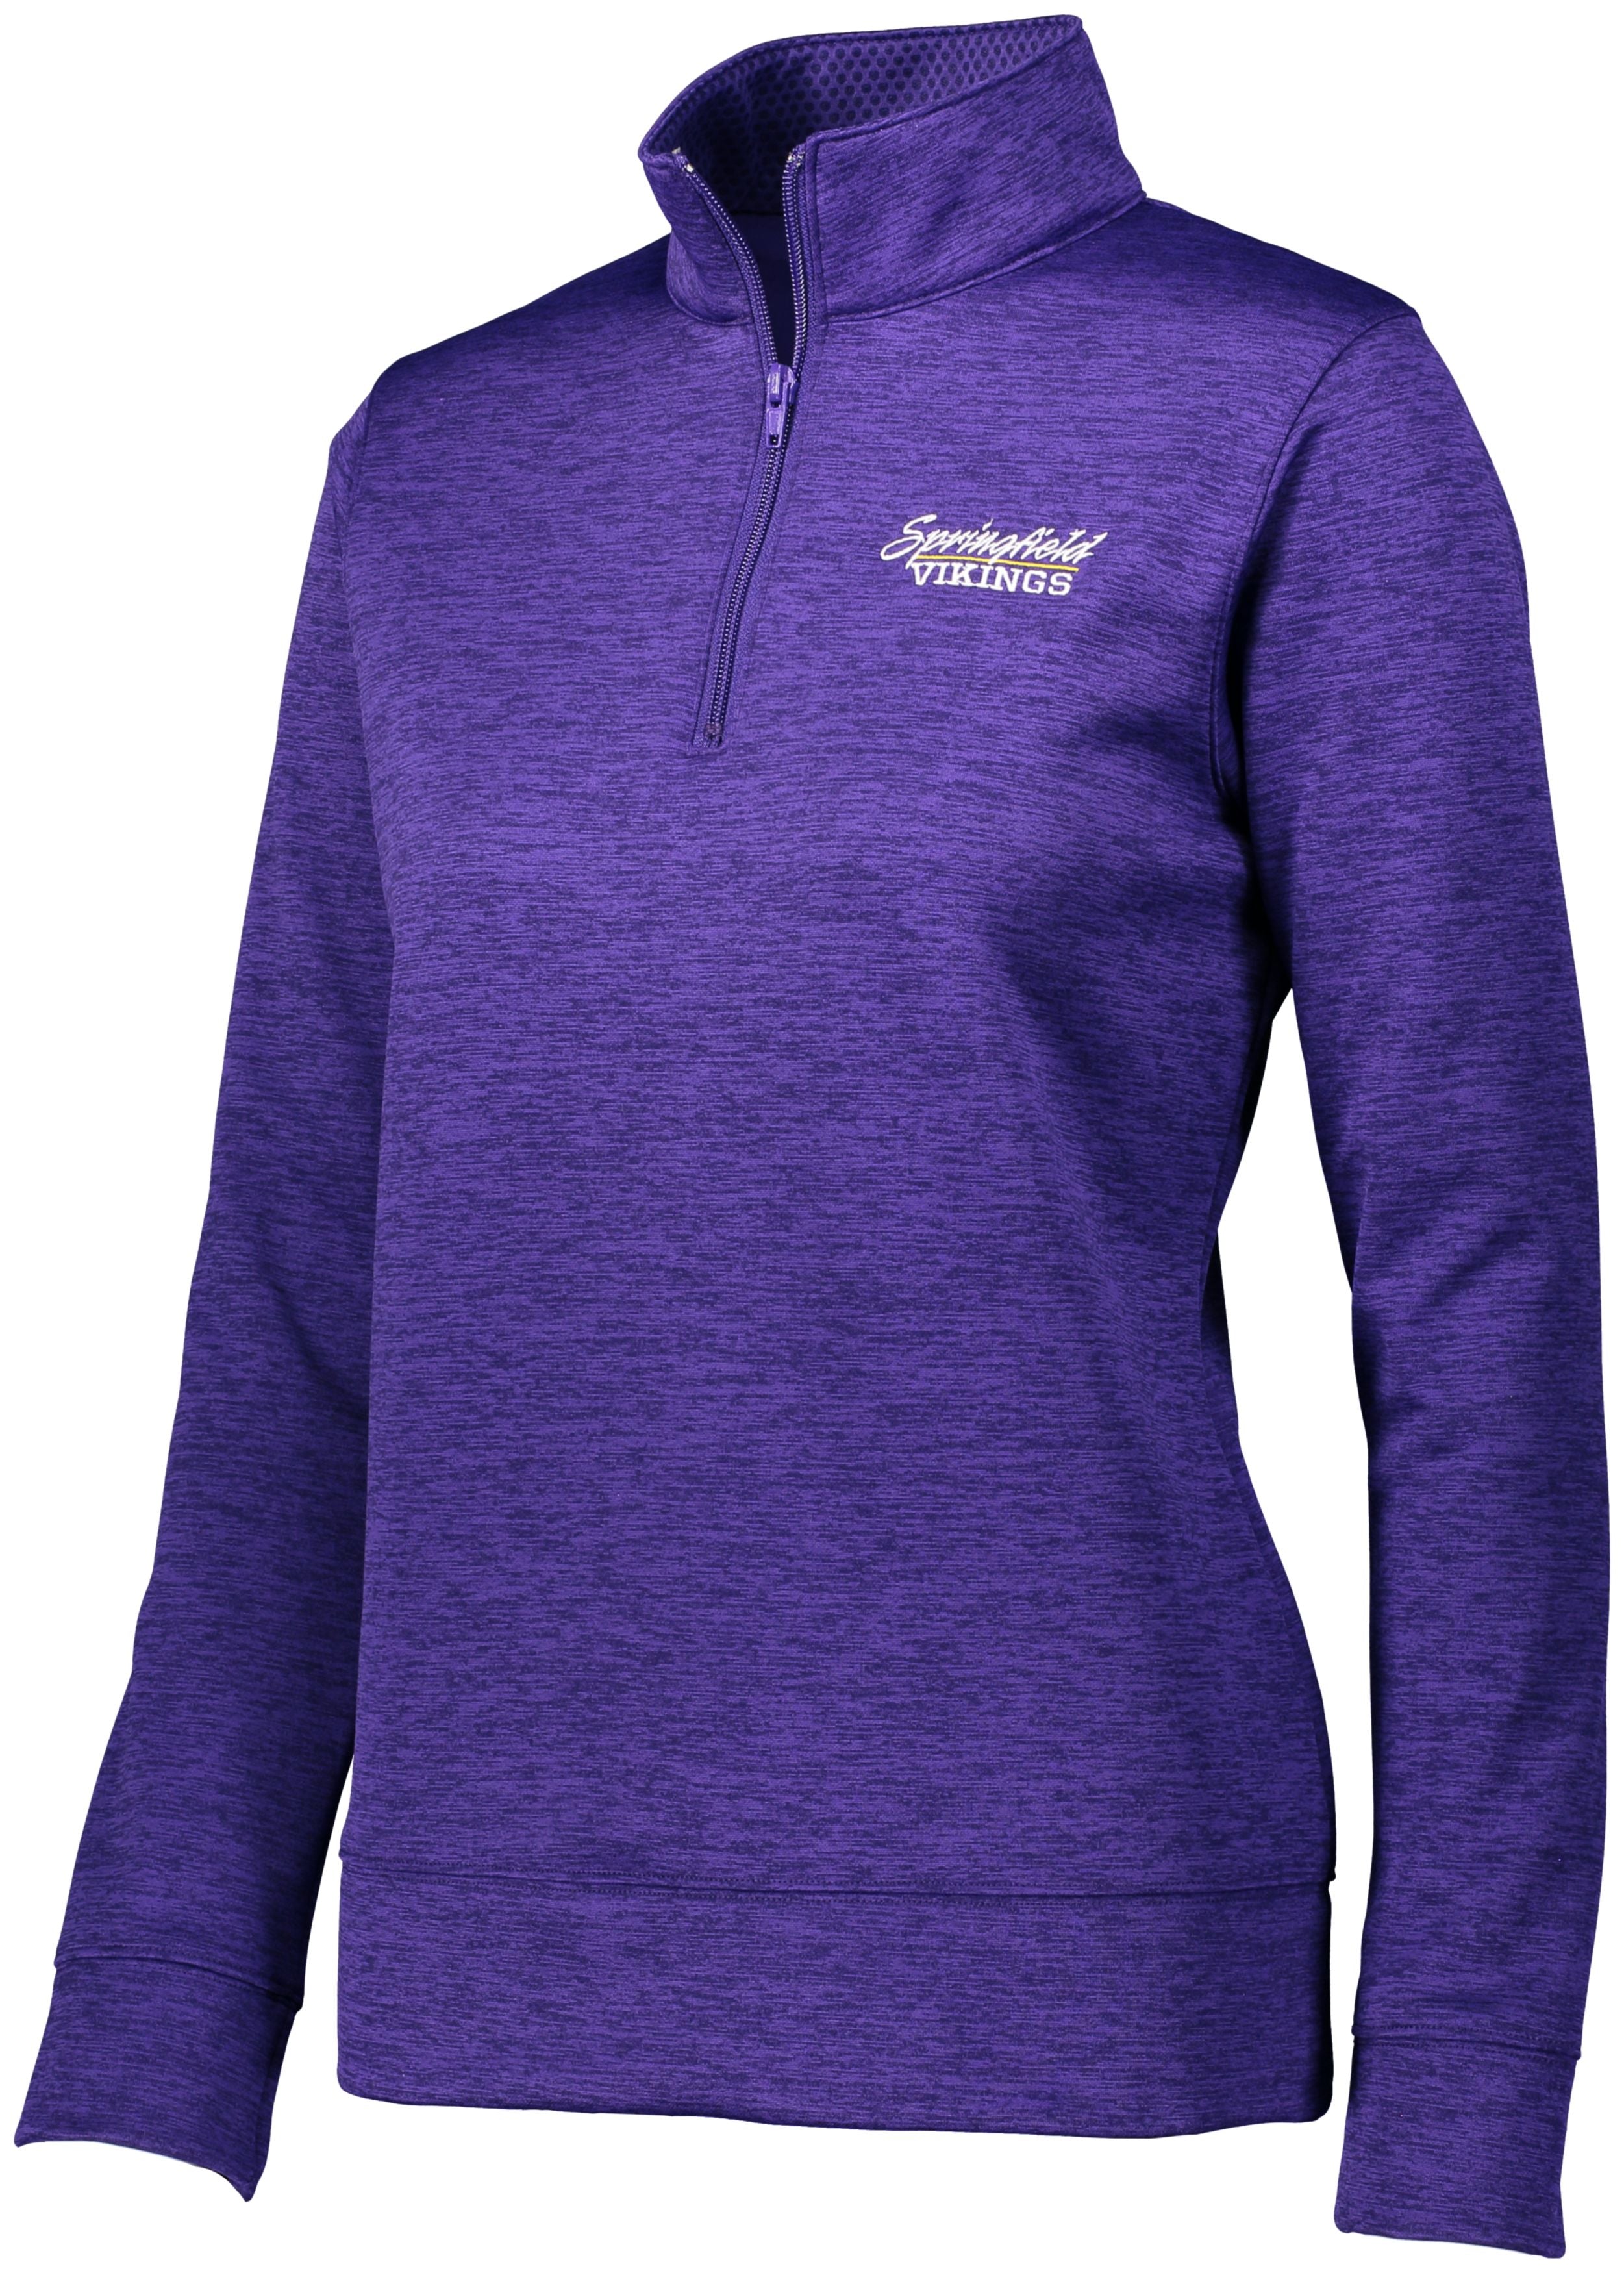 Augusta Sportswear Ladies Stoked Tonal Heather Pullover in Purple  -Part of the Ladies, Ladies-Pullover, Augusta-Products, Outerwear, Tonal-Fleece-Collection product lines at KanaleyCreations.com